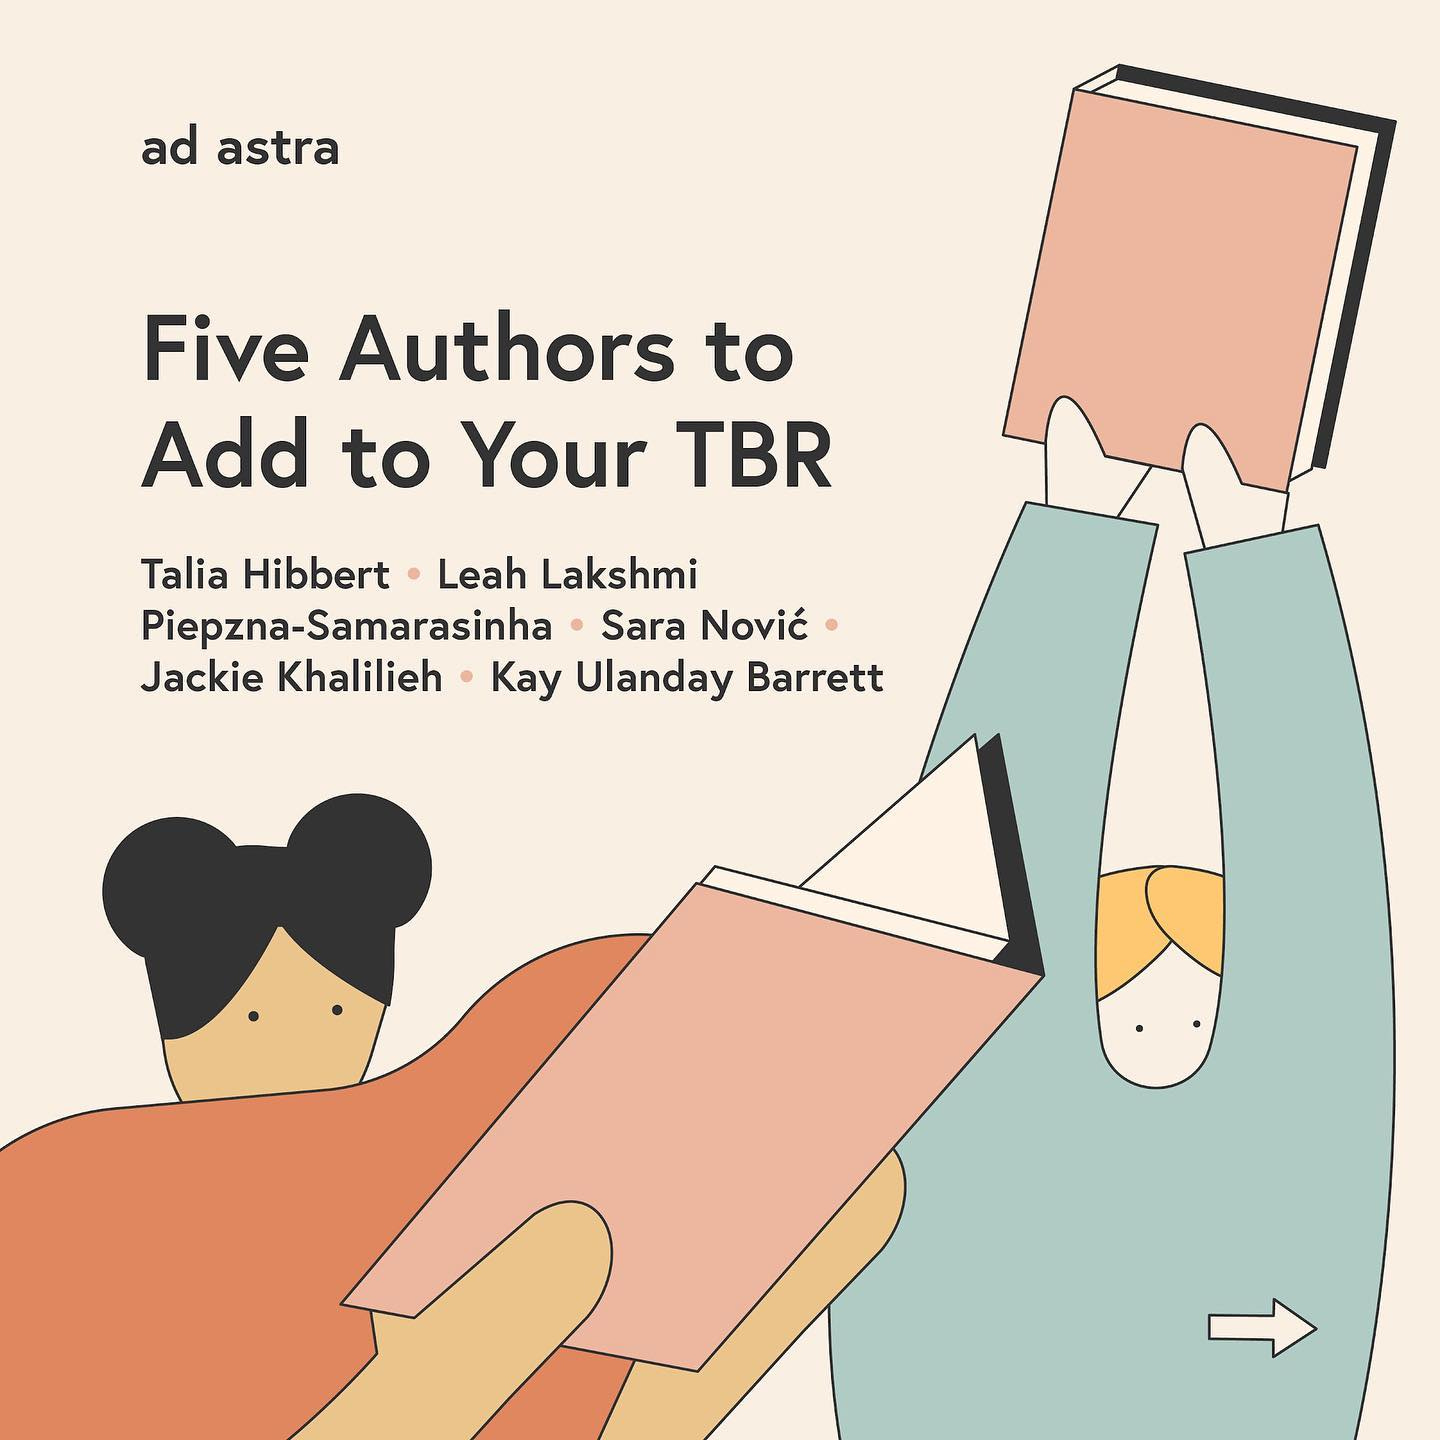 Five authors to add to your TBR